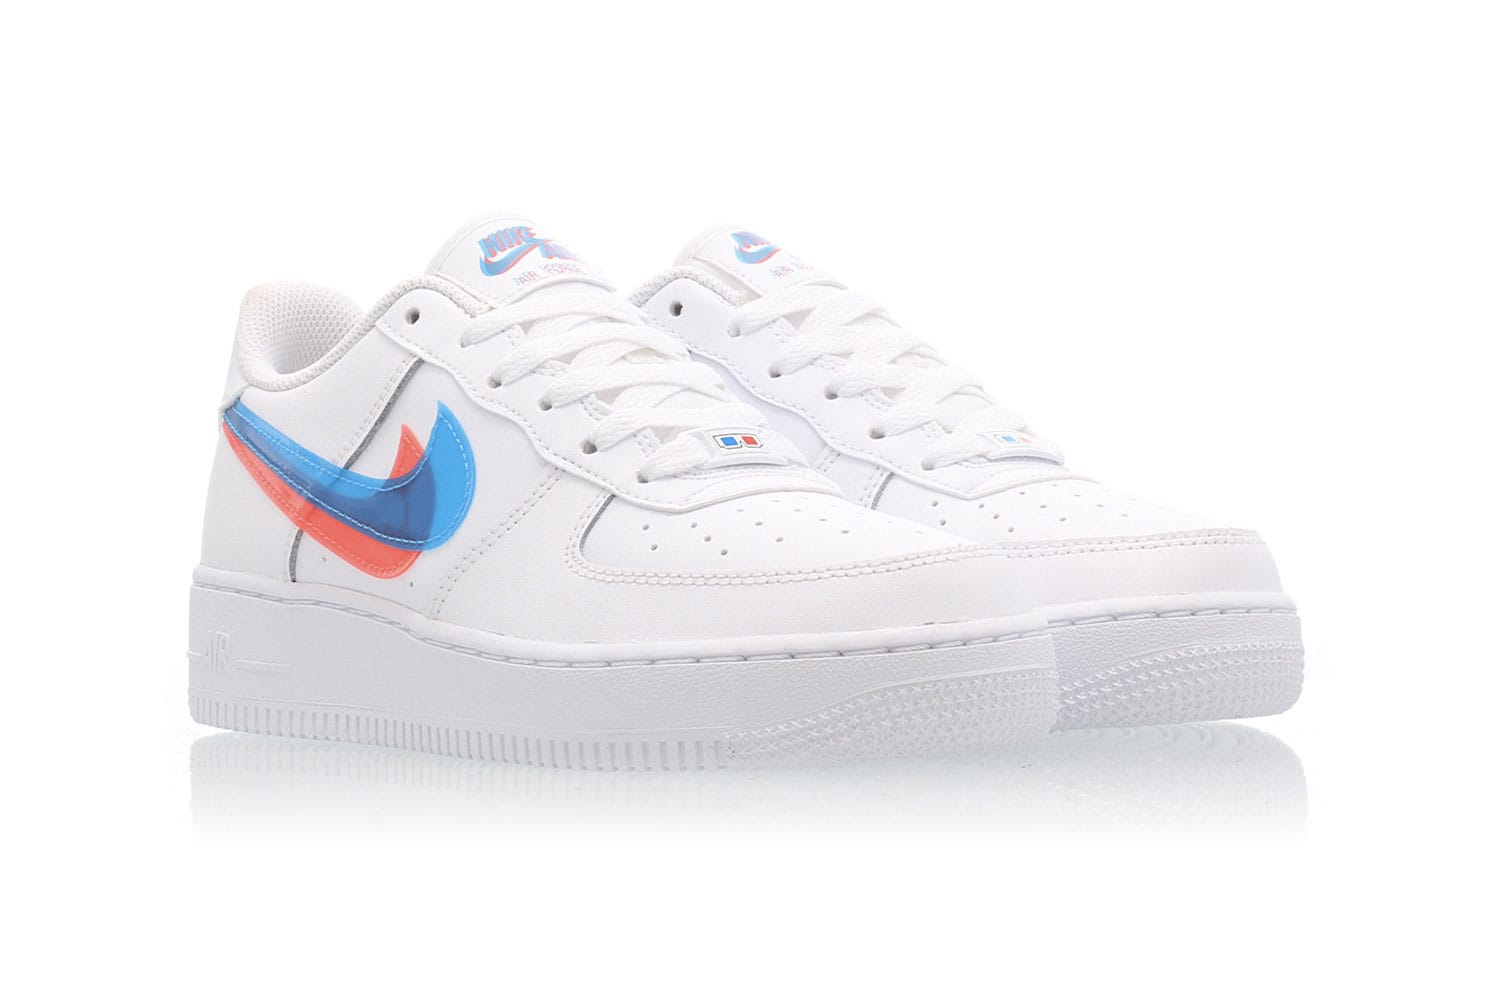 nike air force 1s require 3d glasses